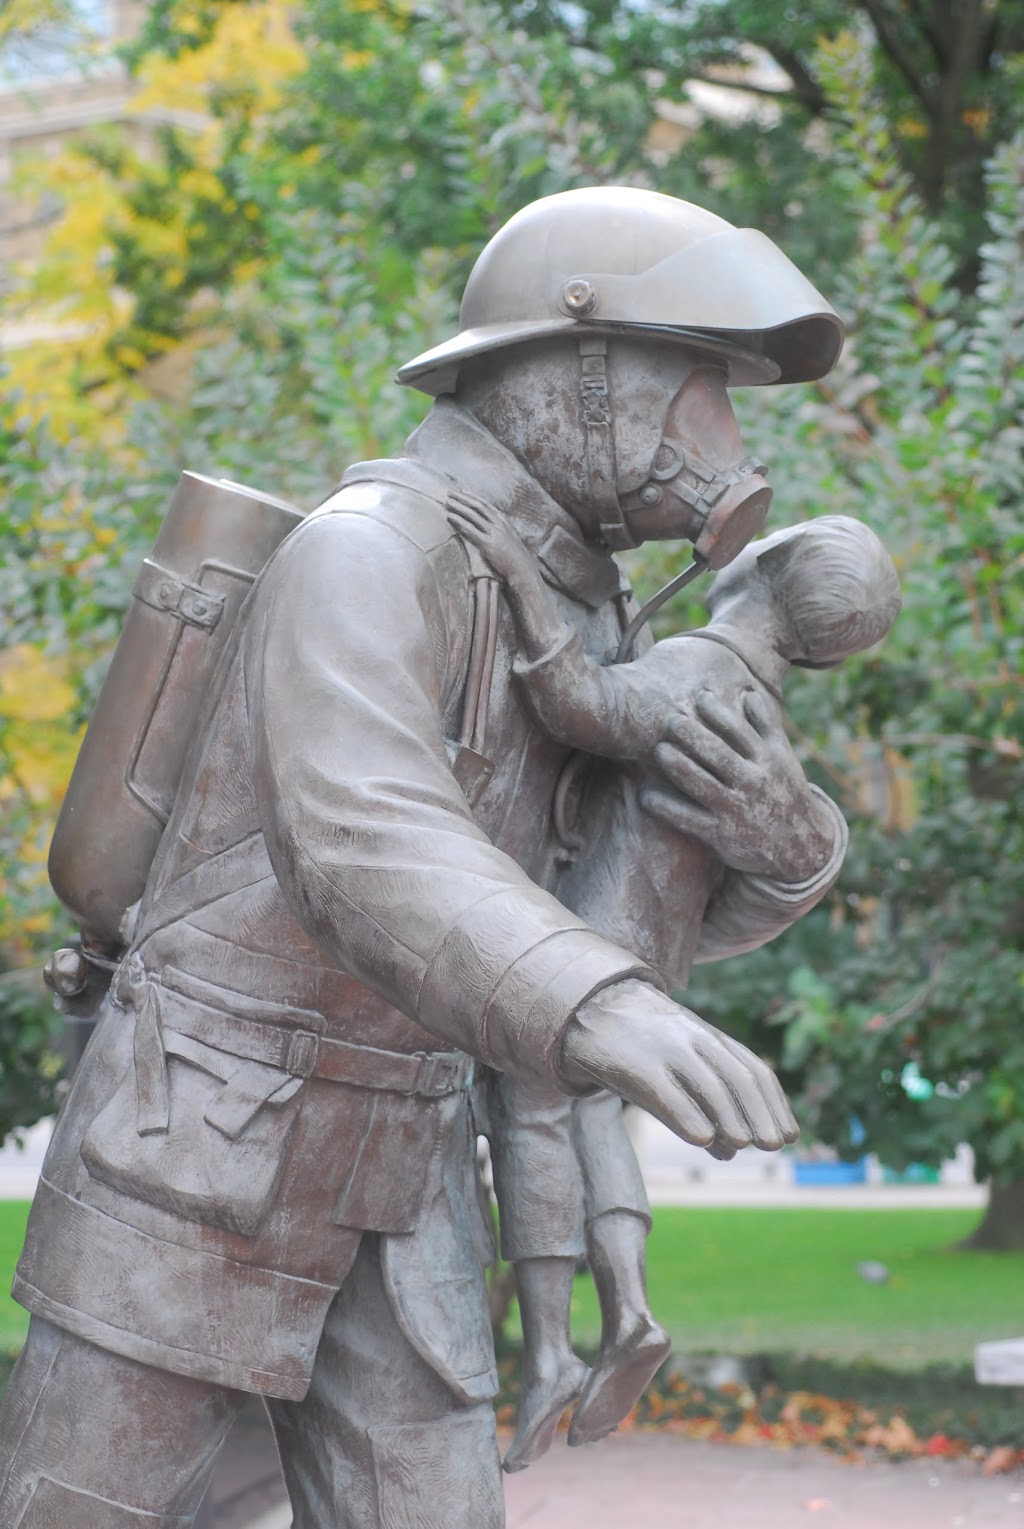 Ontario Fire Fighters Memorial | park | College St, Toronto, ON M5G 1L6, Canada